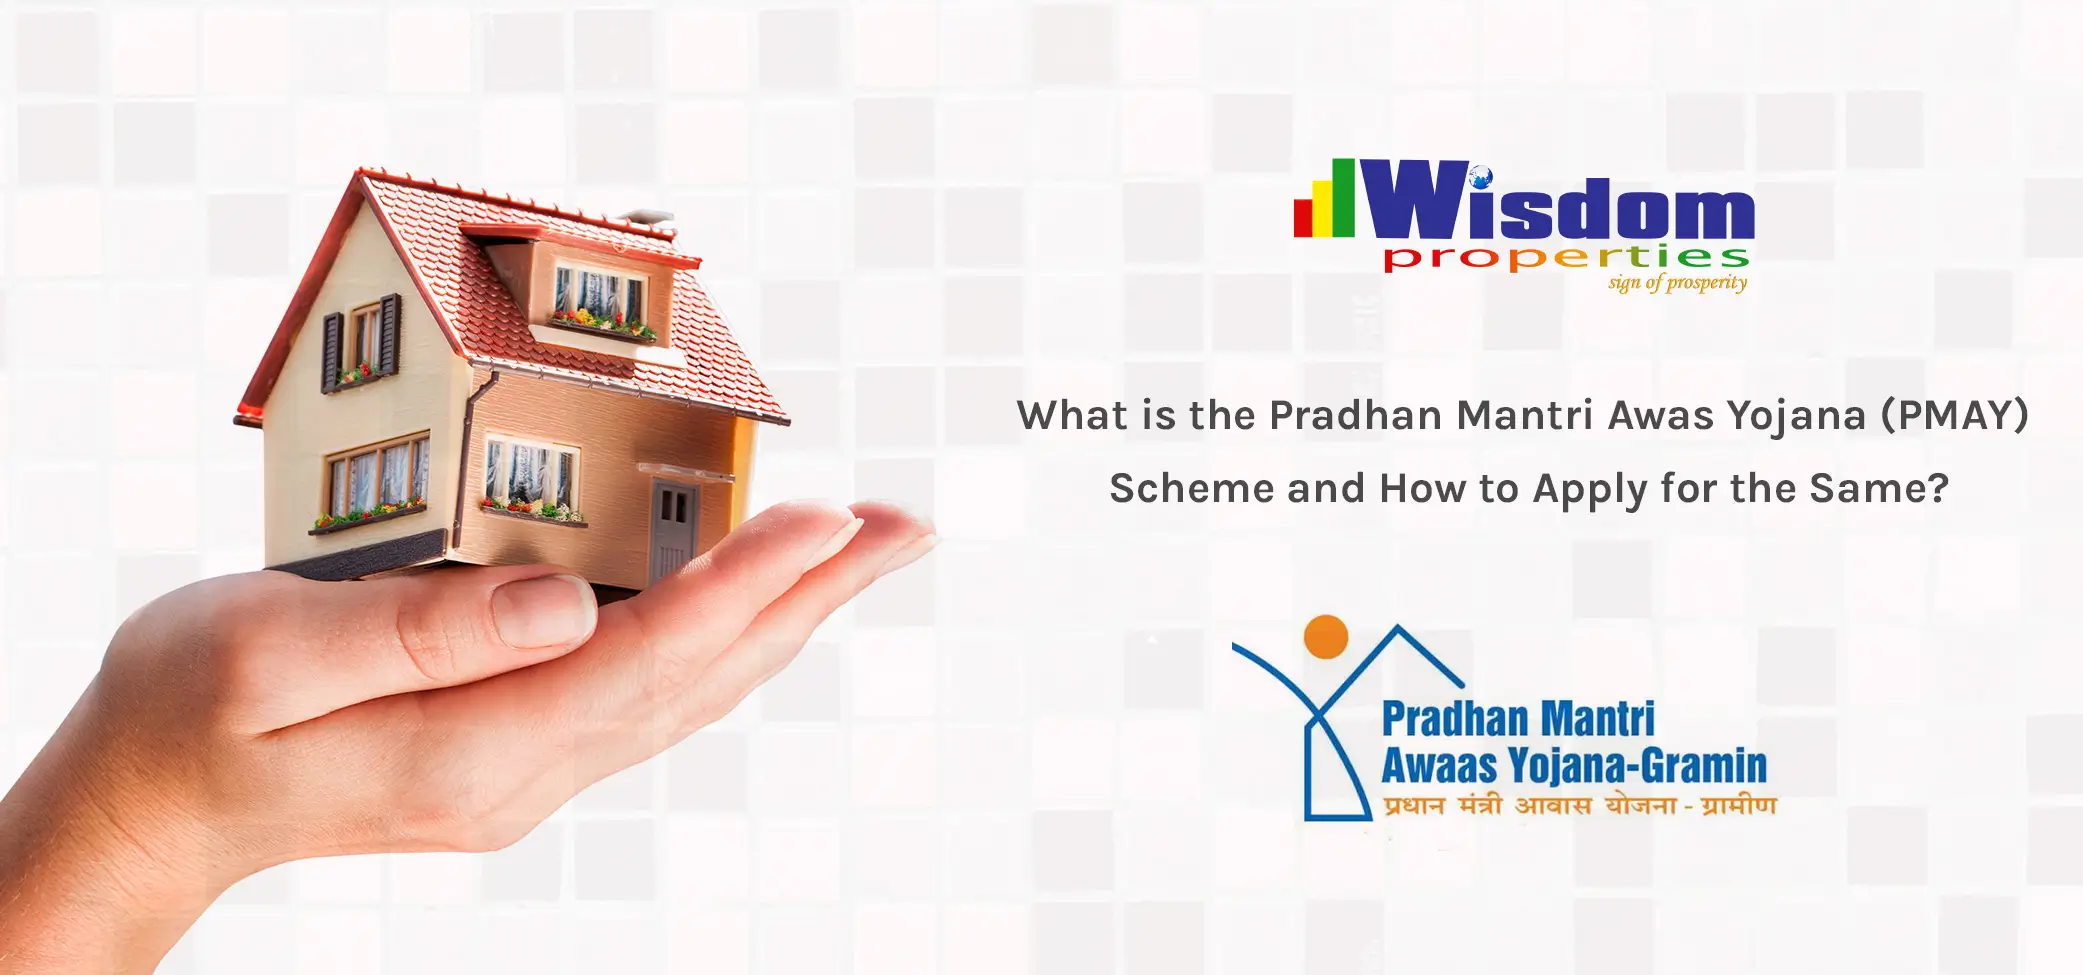 What is the Pradhan Mantri Awas Yojana (PMAY) Scheme and How to Apply for the Same?